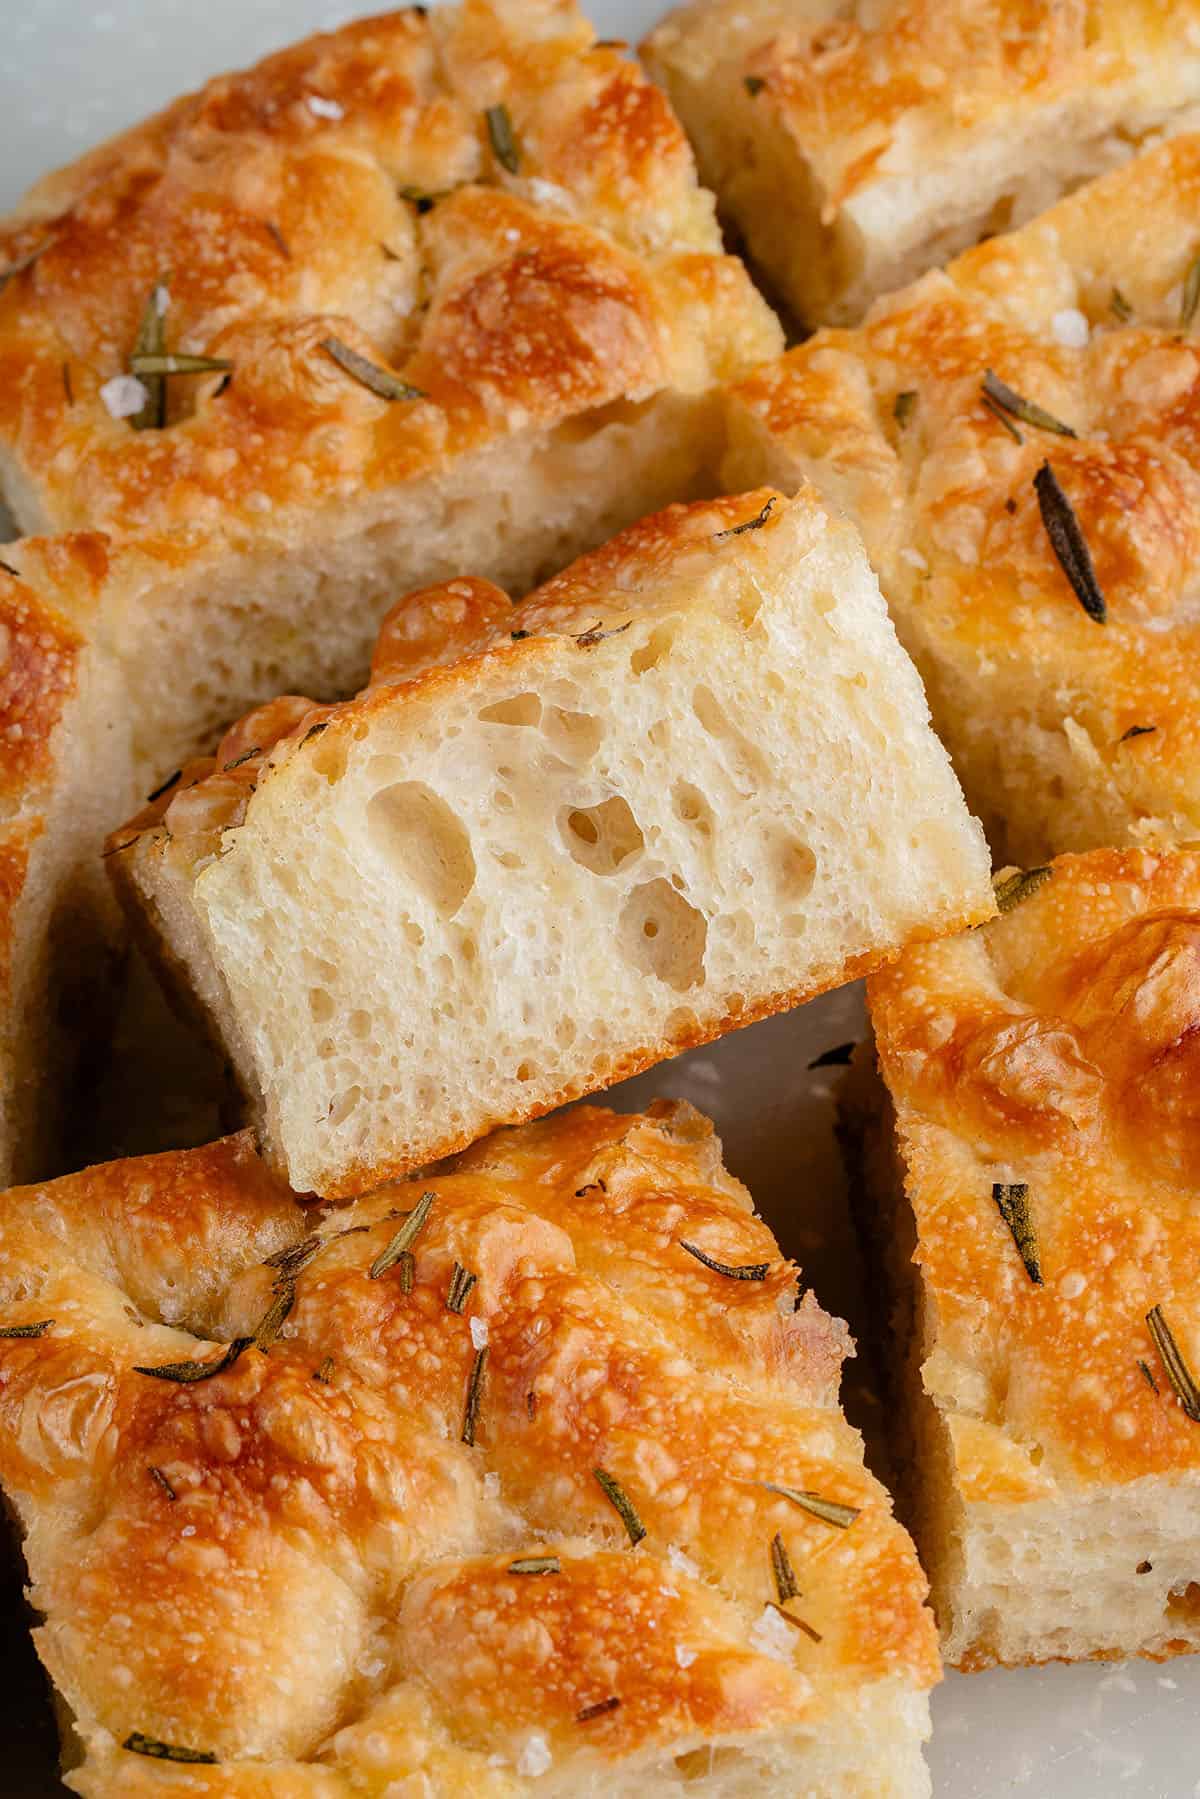 no-knead focaccia on it's side showing the crumb